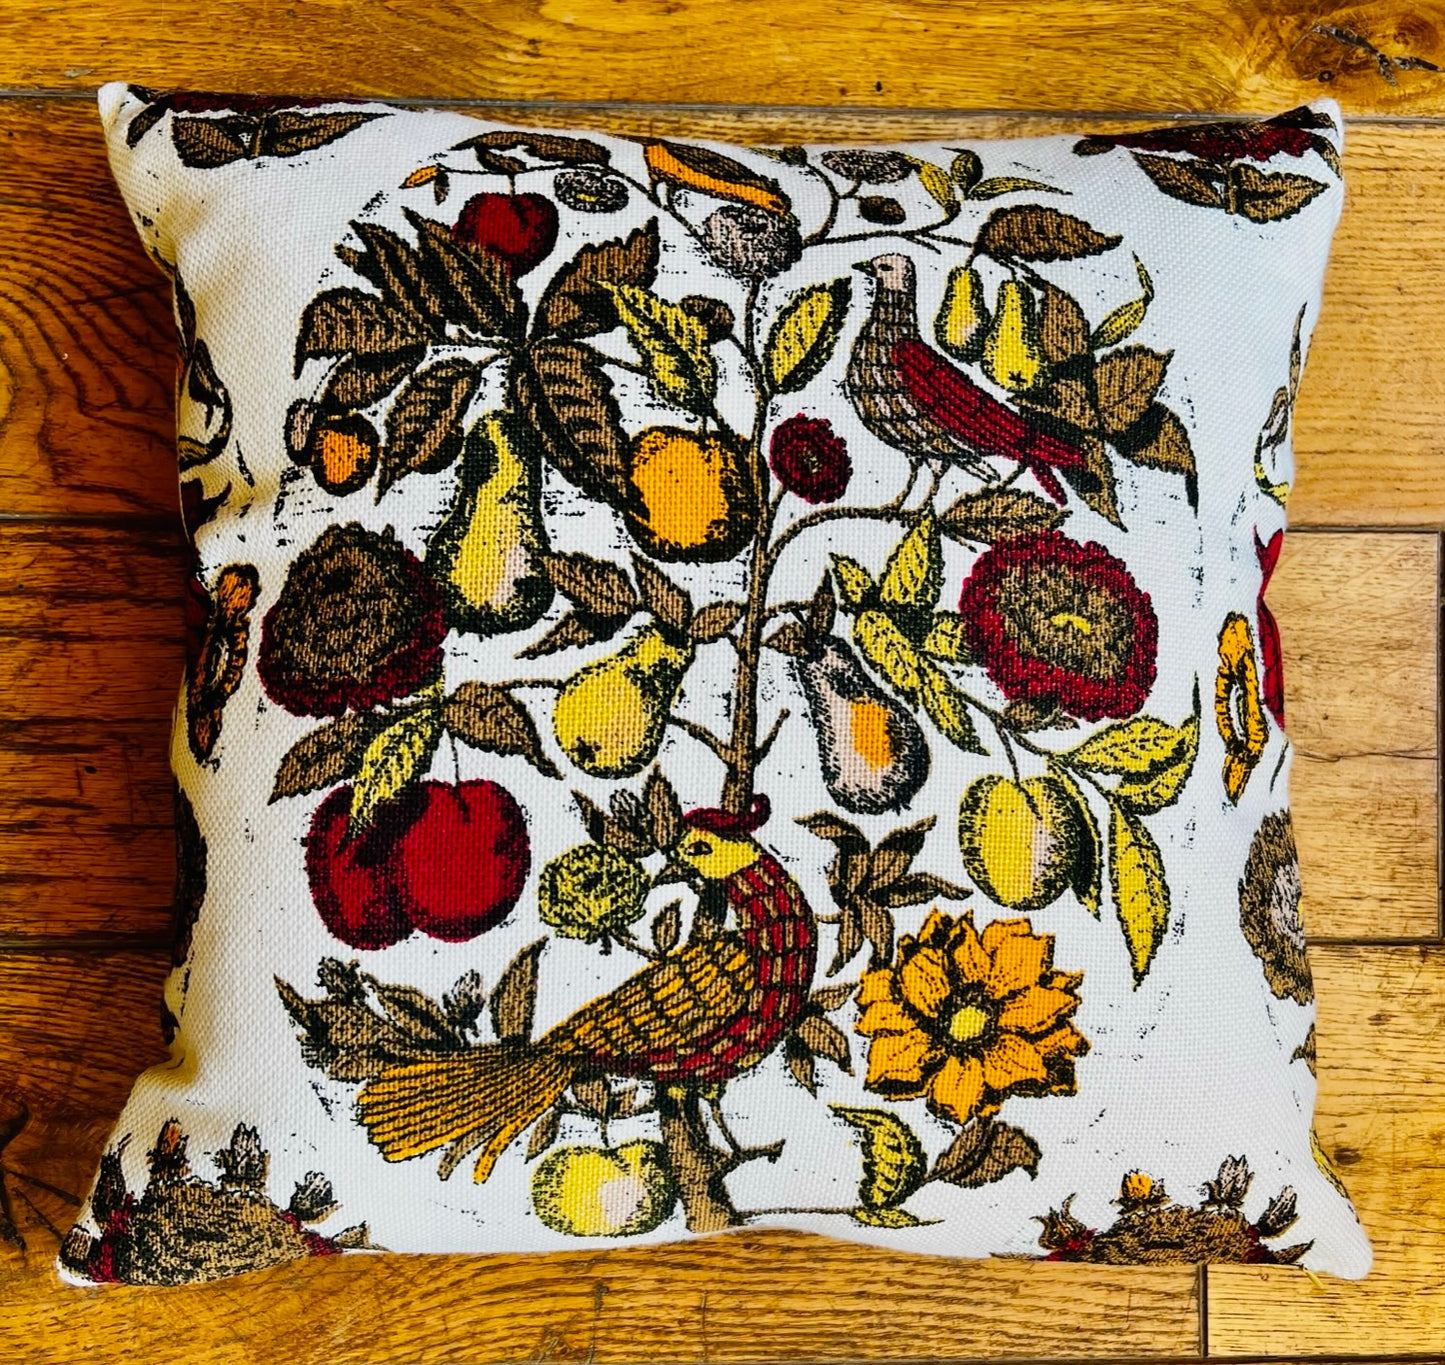 Cushion - Vintage Linen - Partridge in a Pear Tree - Yellow Ticking Stripe reverse - Size Small | New Romantic